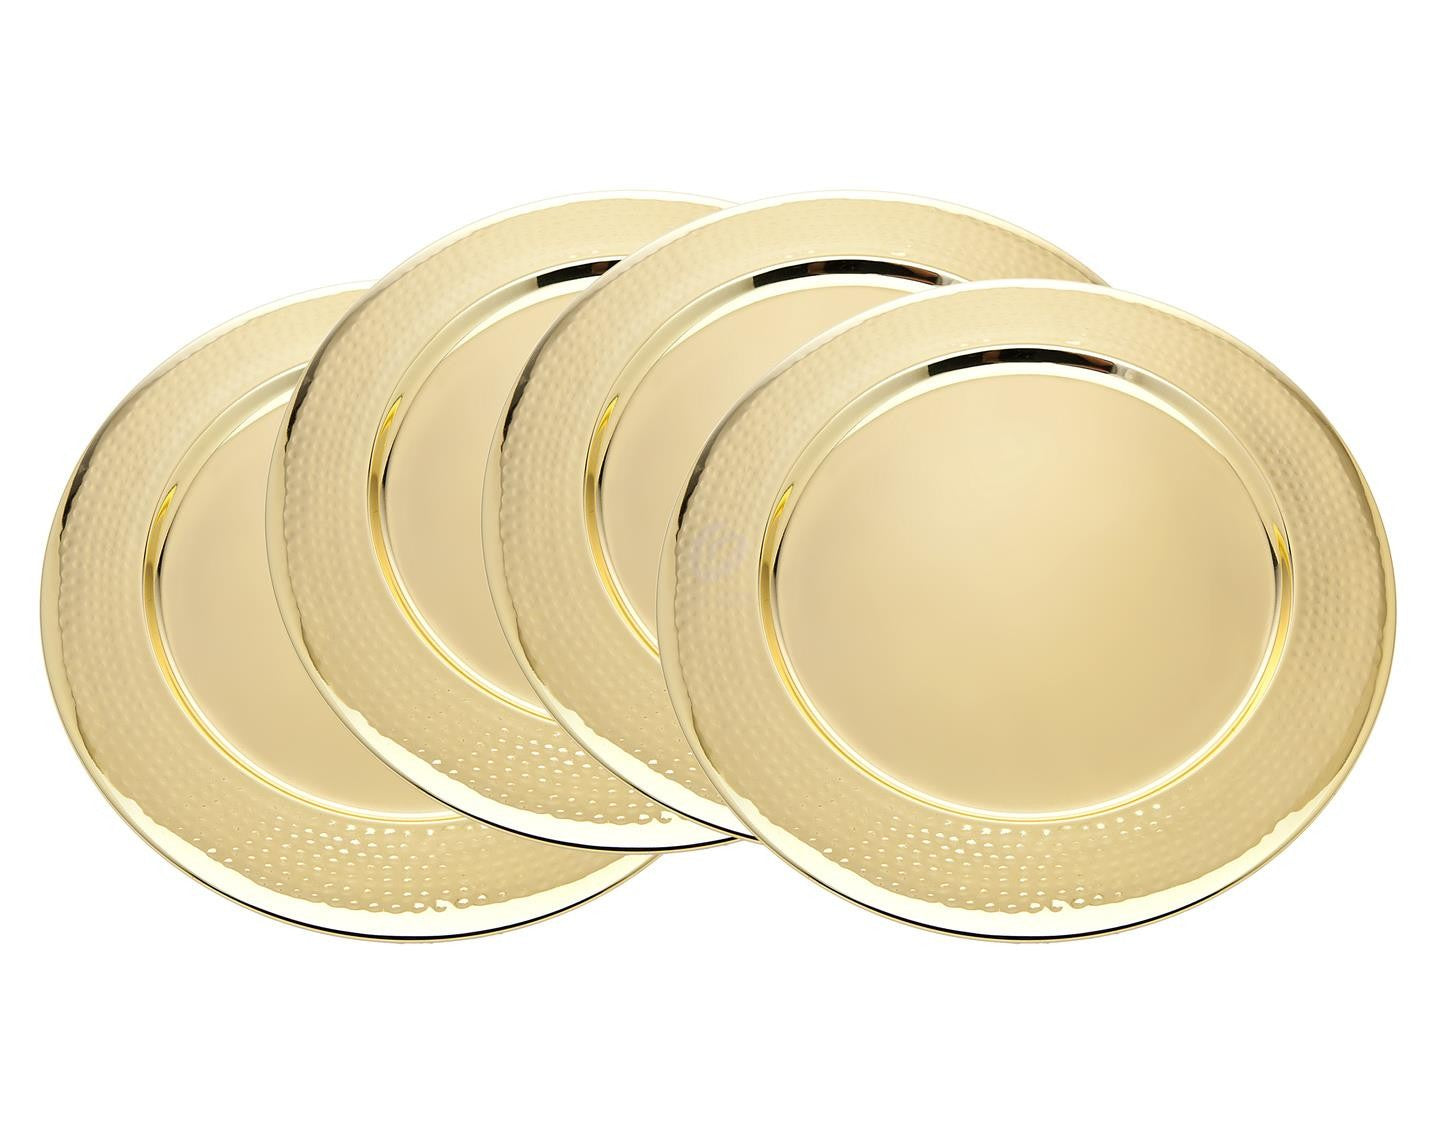 Charger Plates - Set of 4 (Gold)